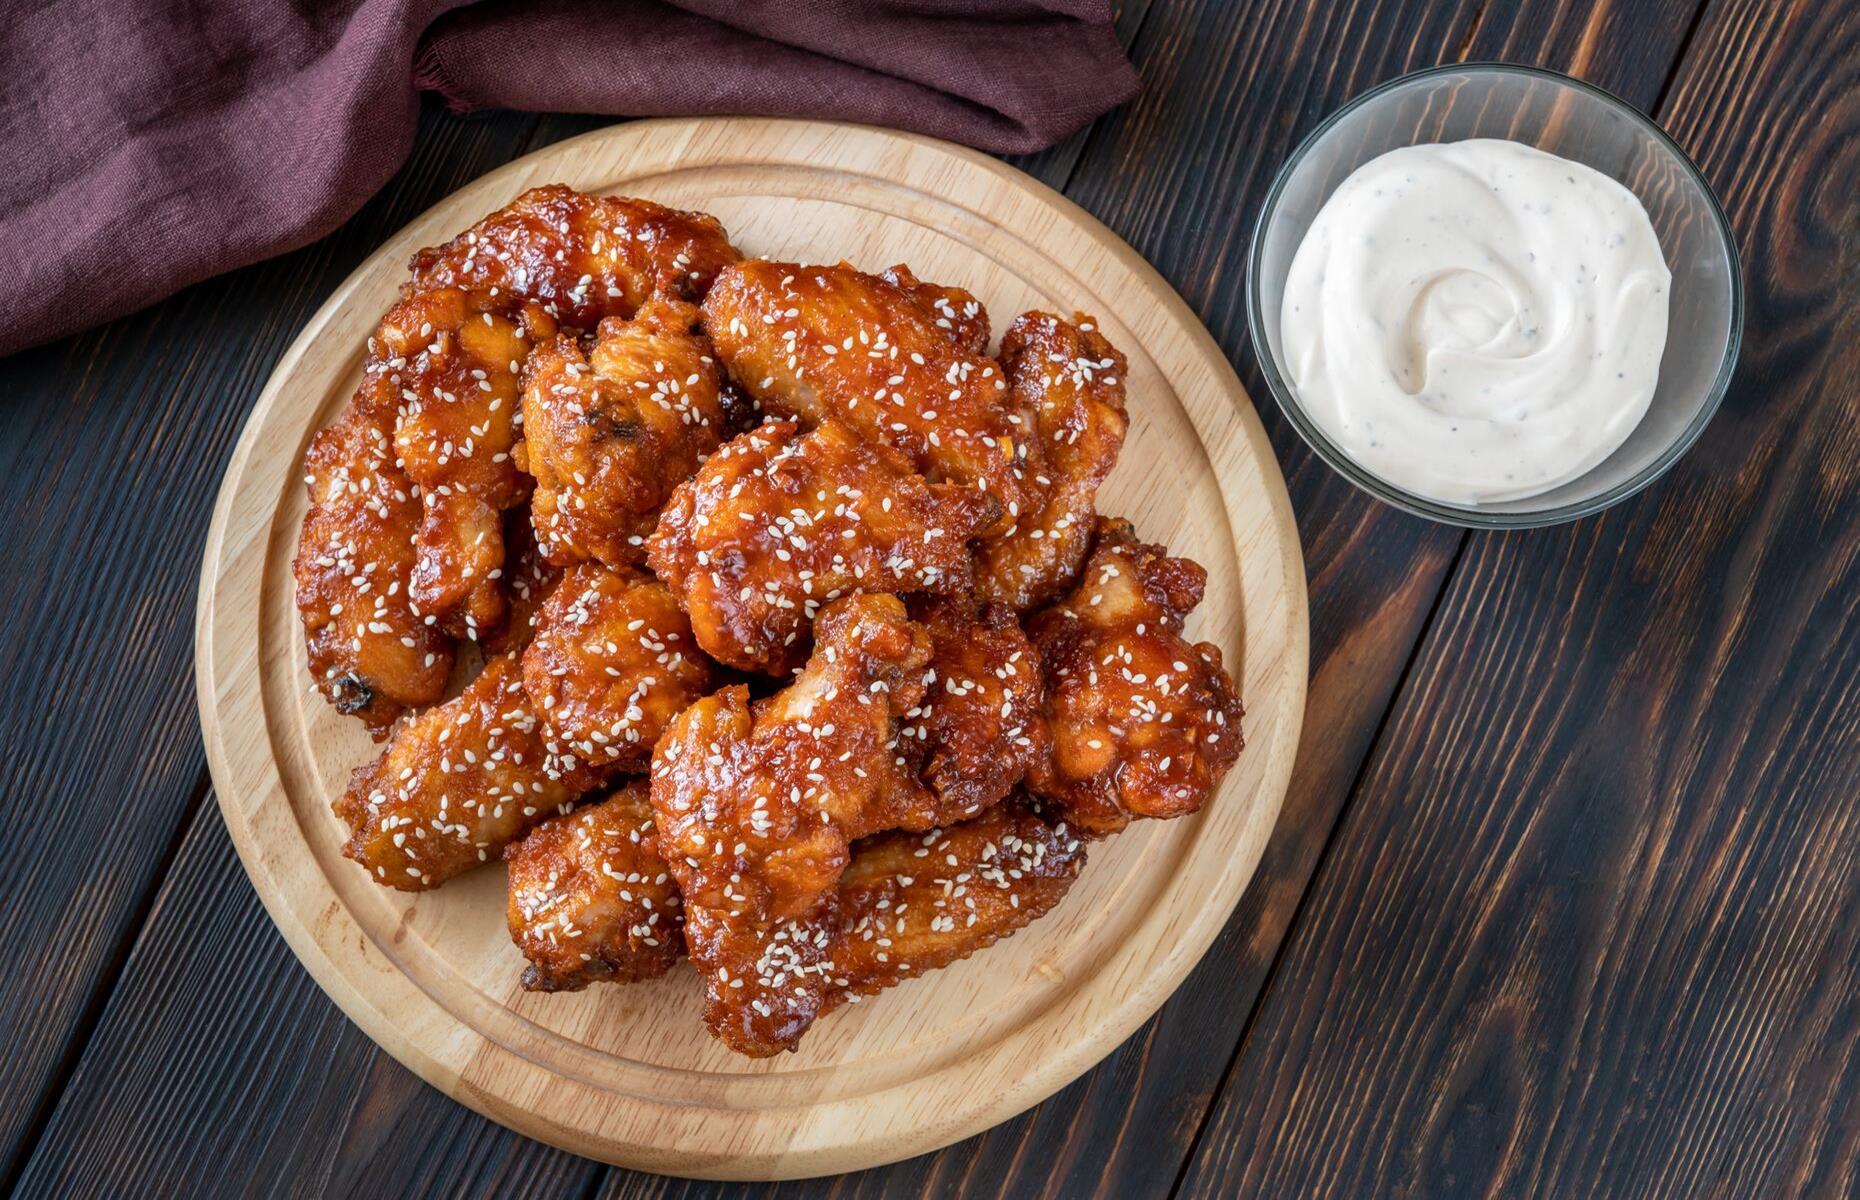 Spice up your chicken wings with these tasty recipes